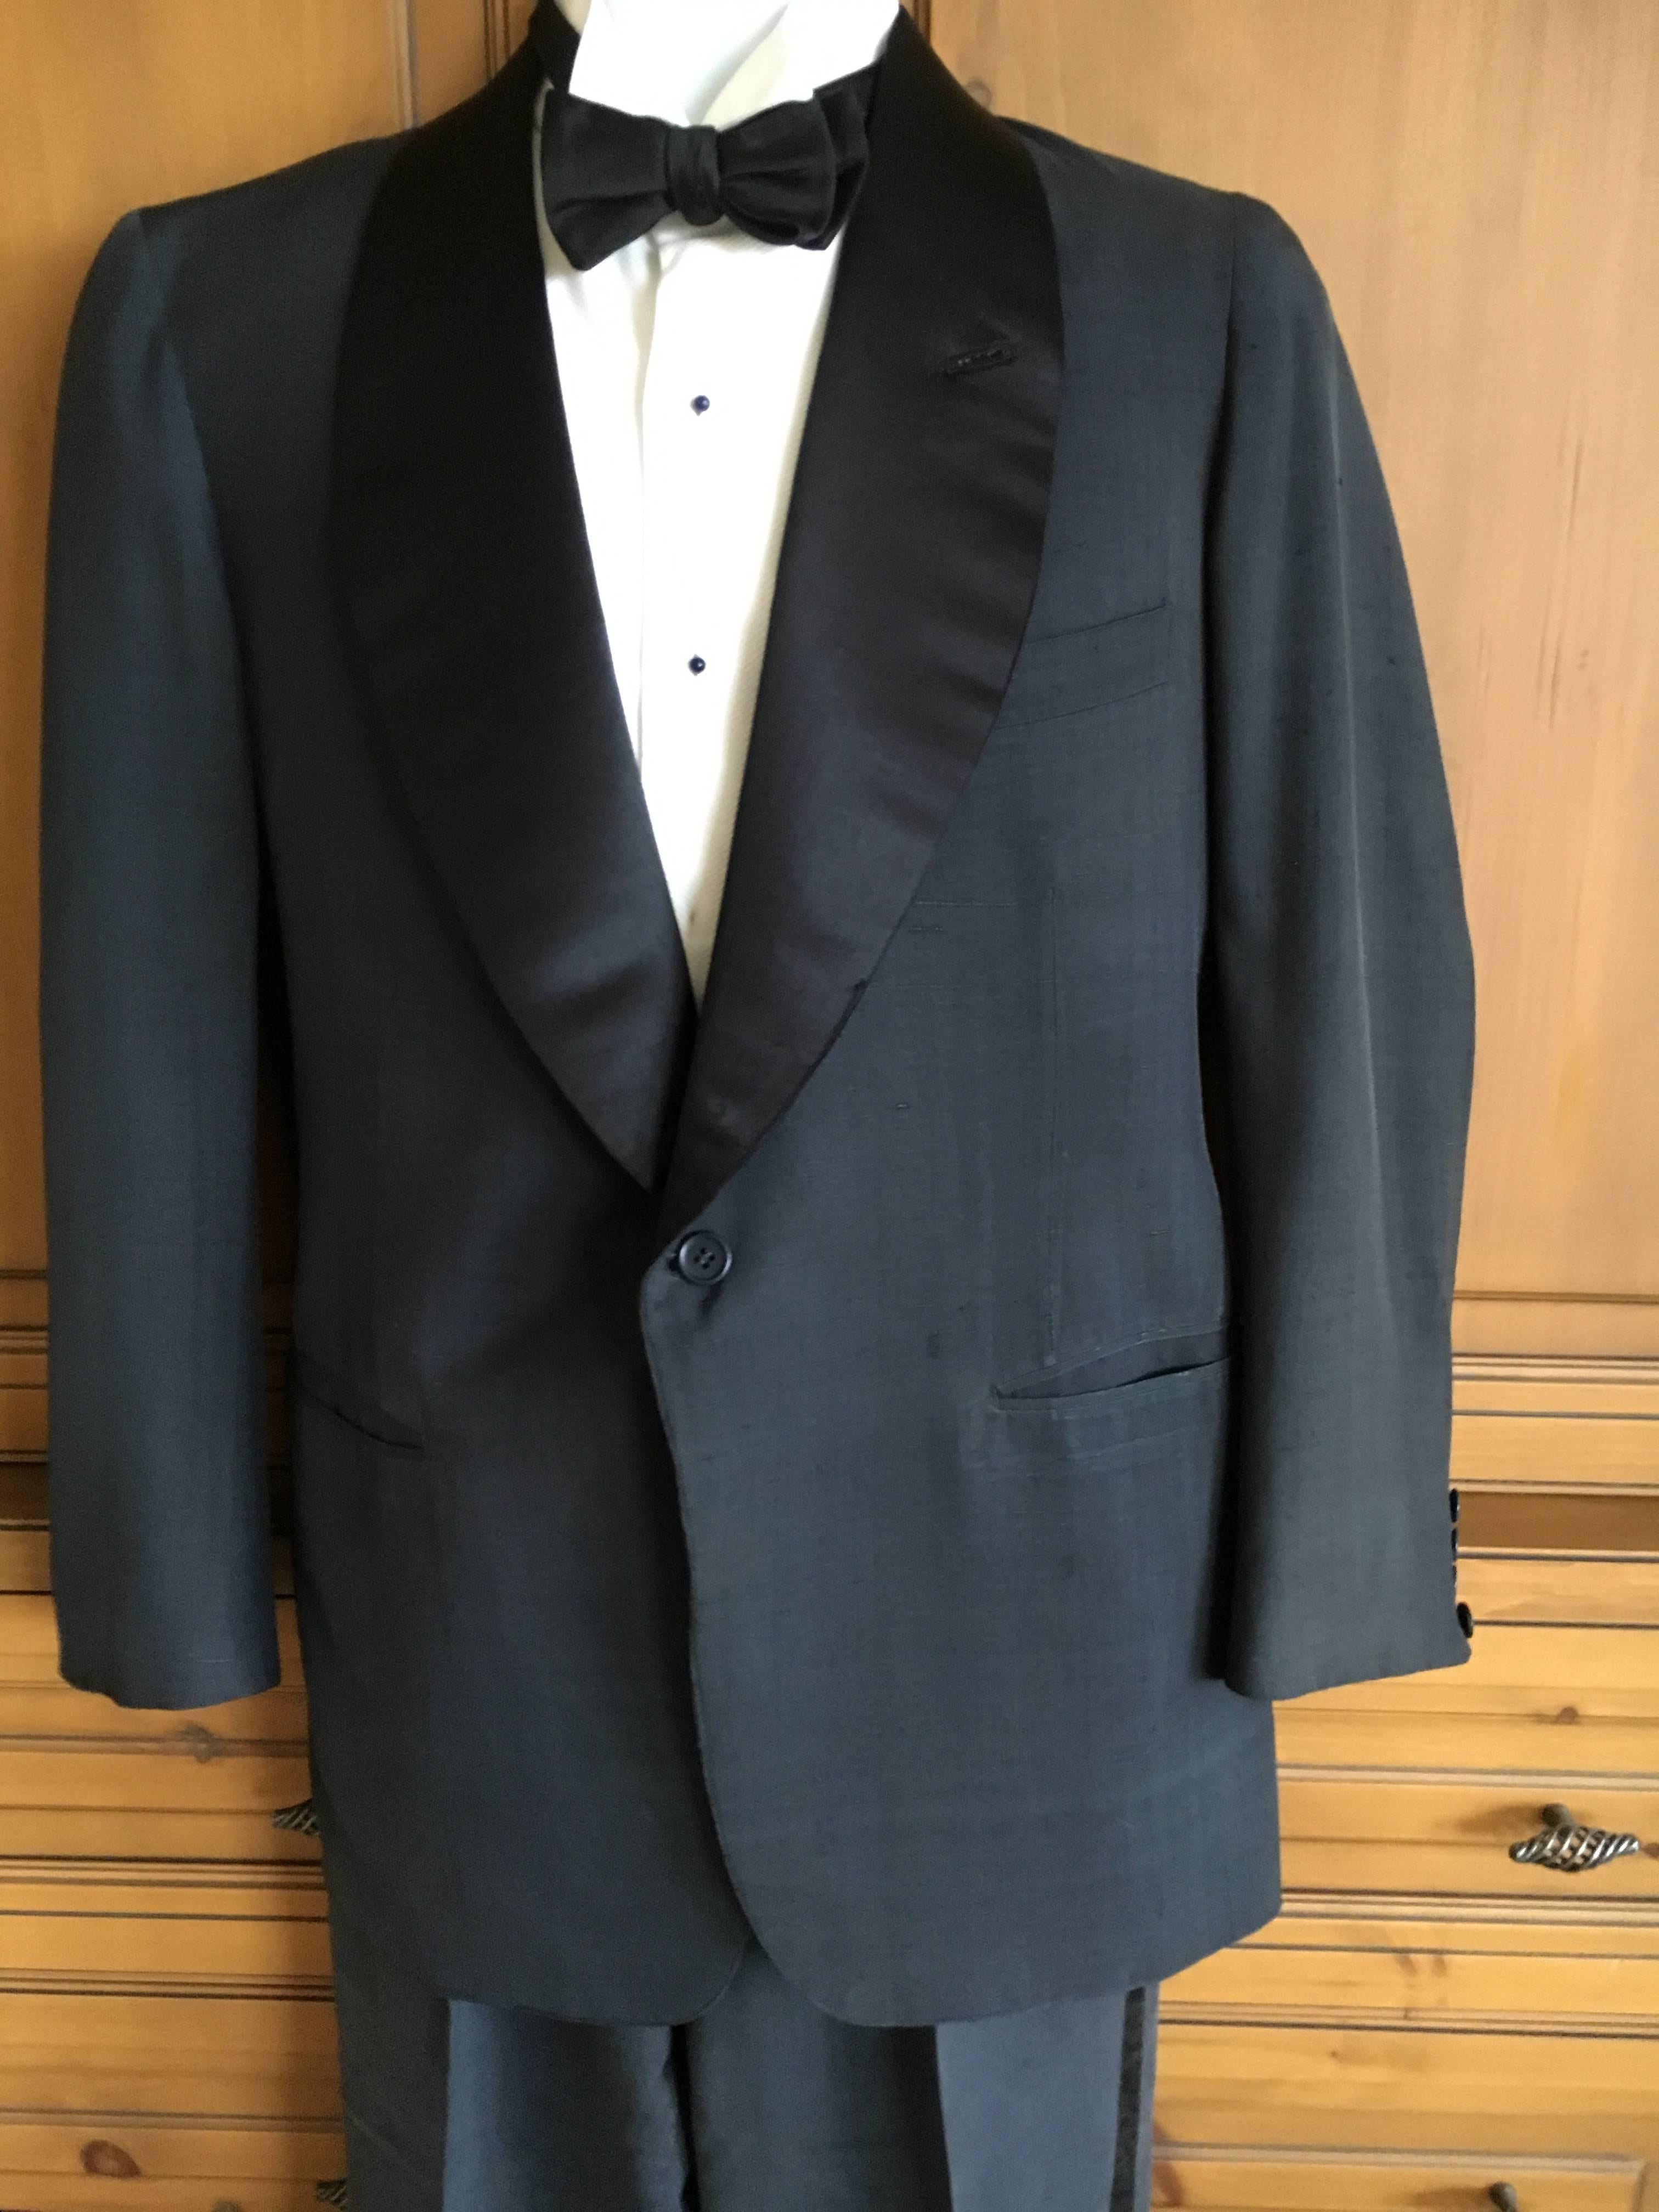 1953 Navy Blue Dupioni Silk Shawl Collar Tuxedo from  Society Tailor E.F. Dunne and Company New York .
 
The owner was a polo playing count, whose estate we are just beginning to process. 
 The estate was run in the old style and these suits were